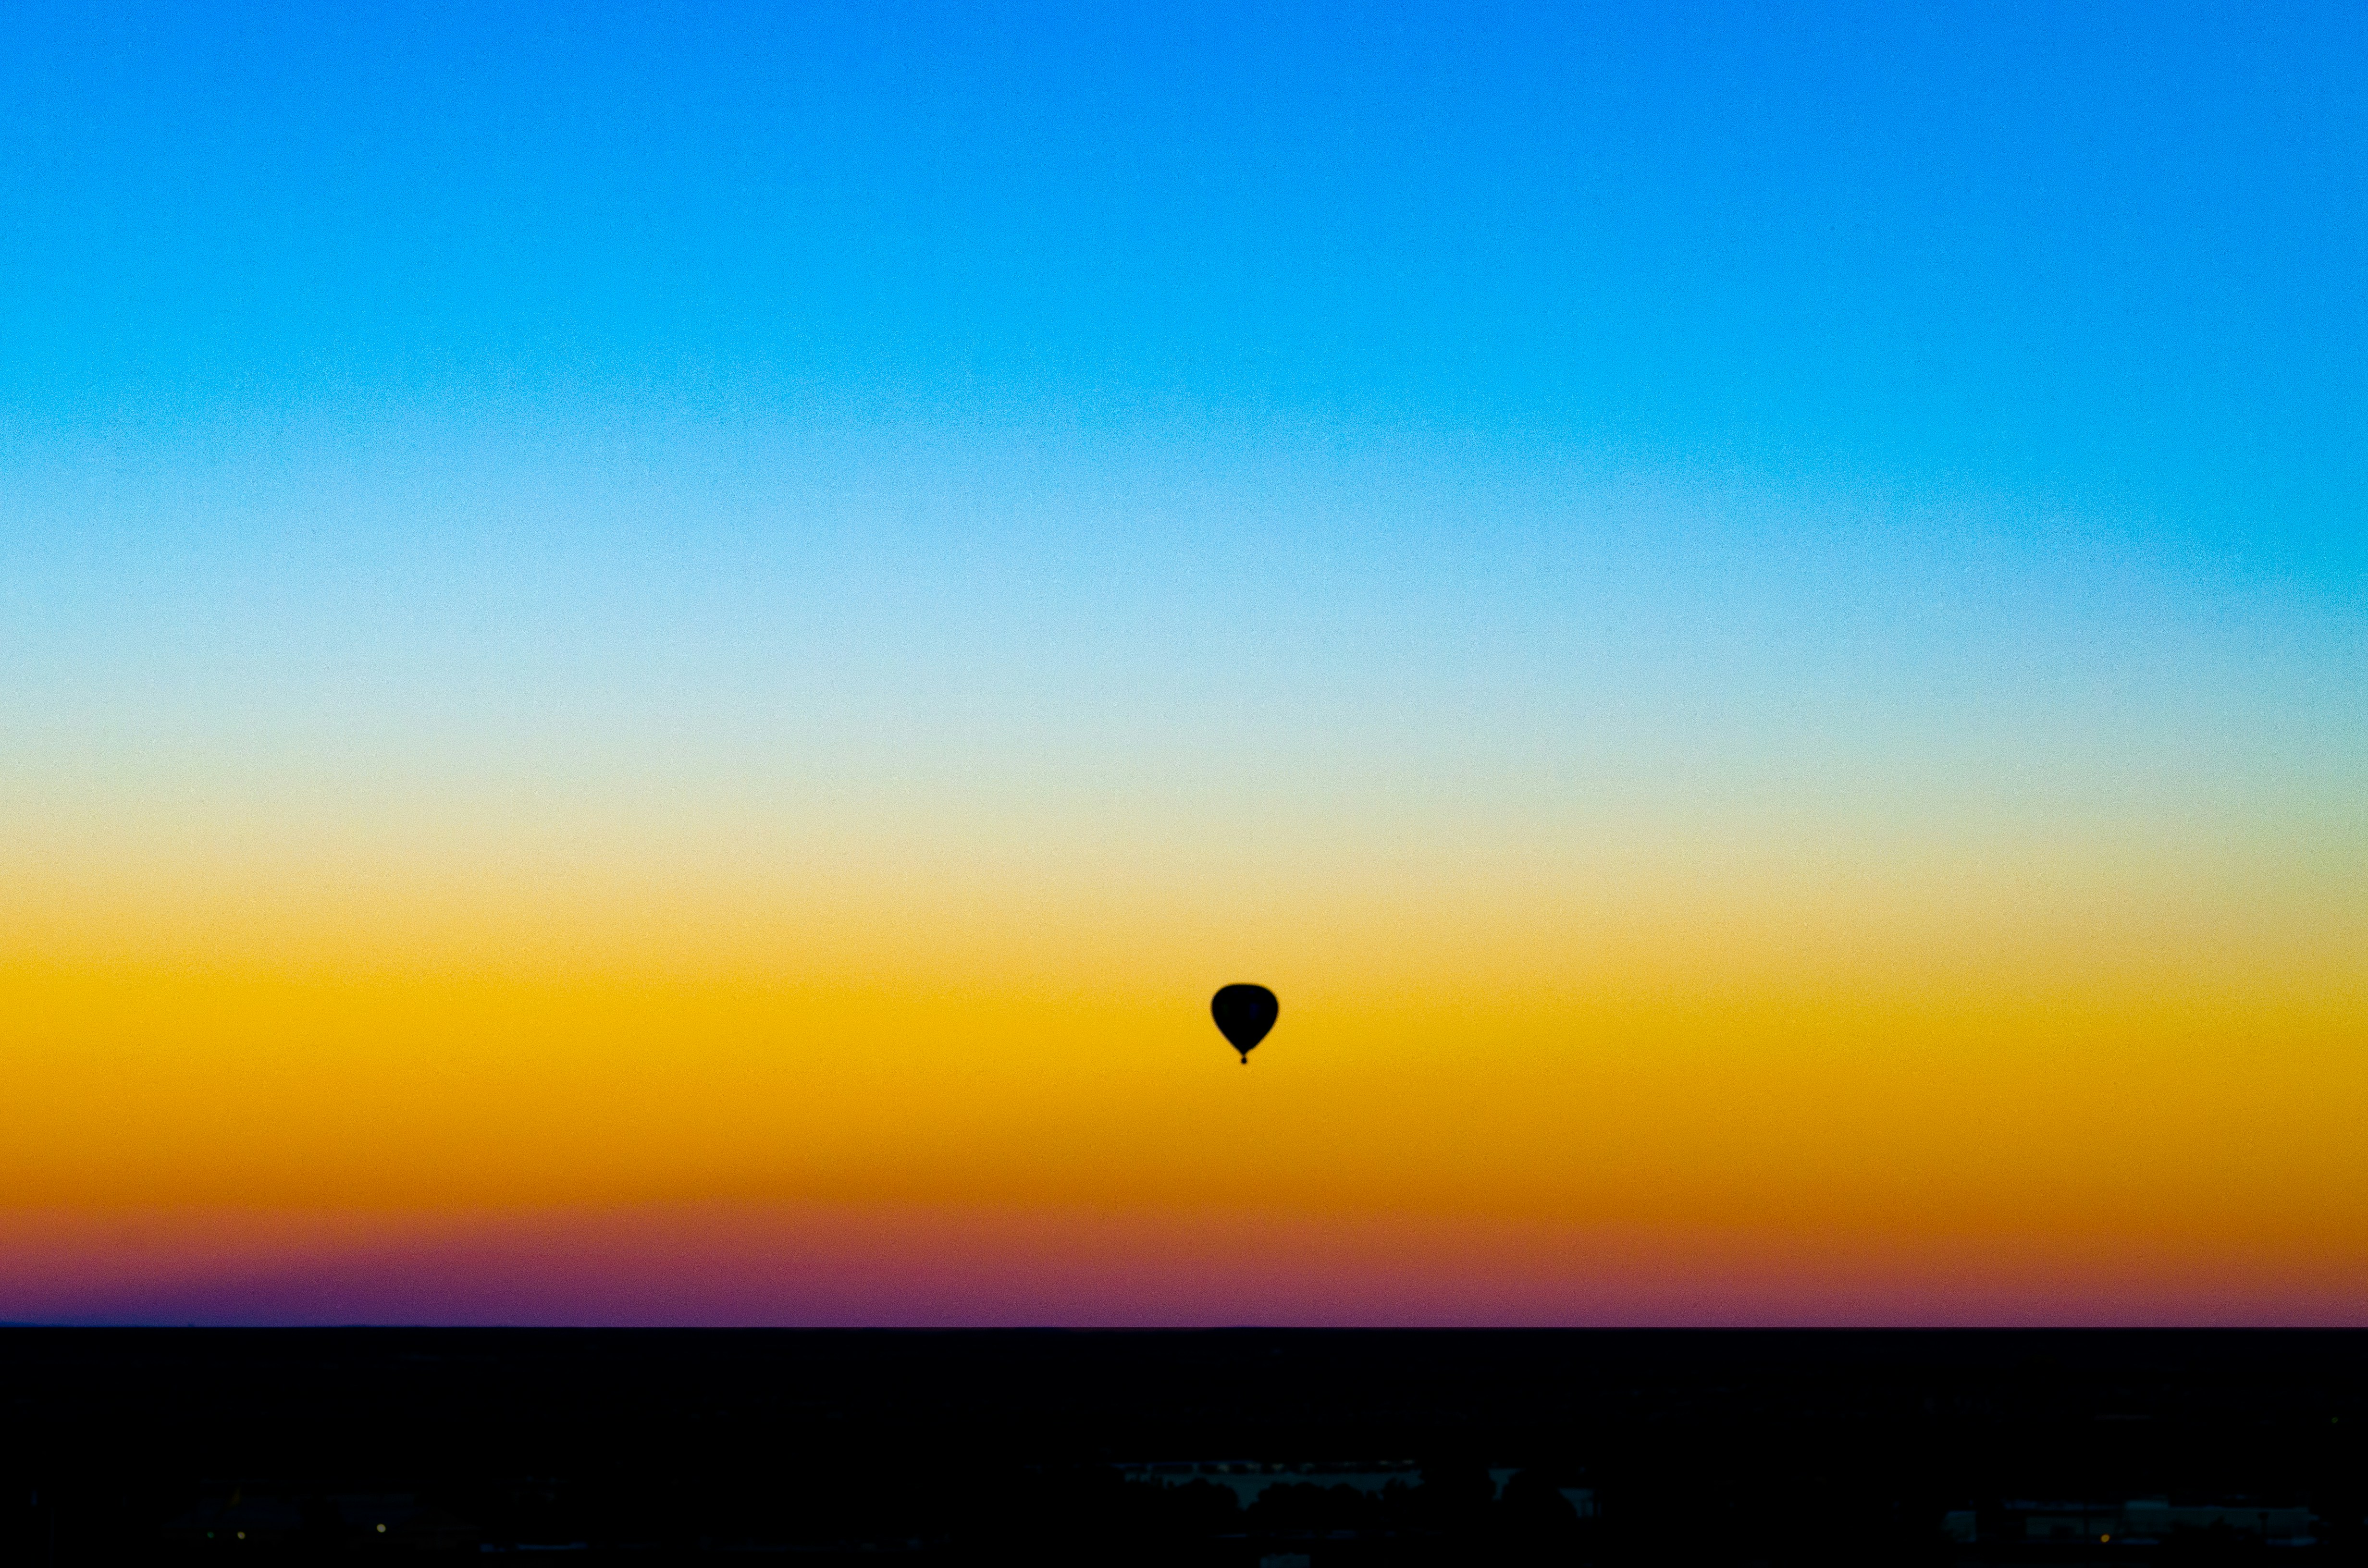 If you have every been to the Ballon Fiesta in Albuquerque, you know what a unique sight this is. In 2017, they had over 500 balloons fly on the first day. I caught a moment early in the day just before sunrise where there was a single balloon making its way across the early morning sky.